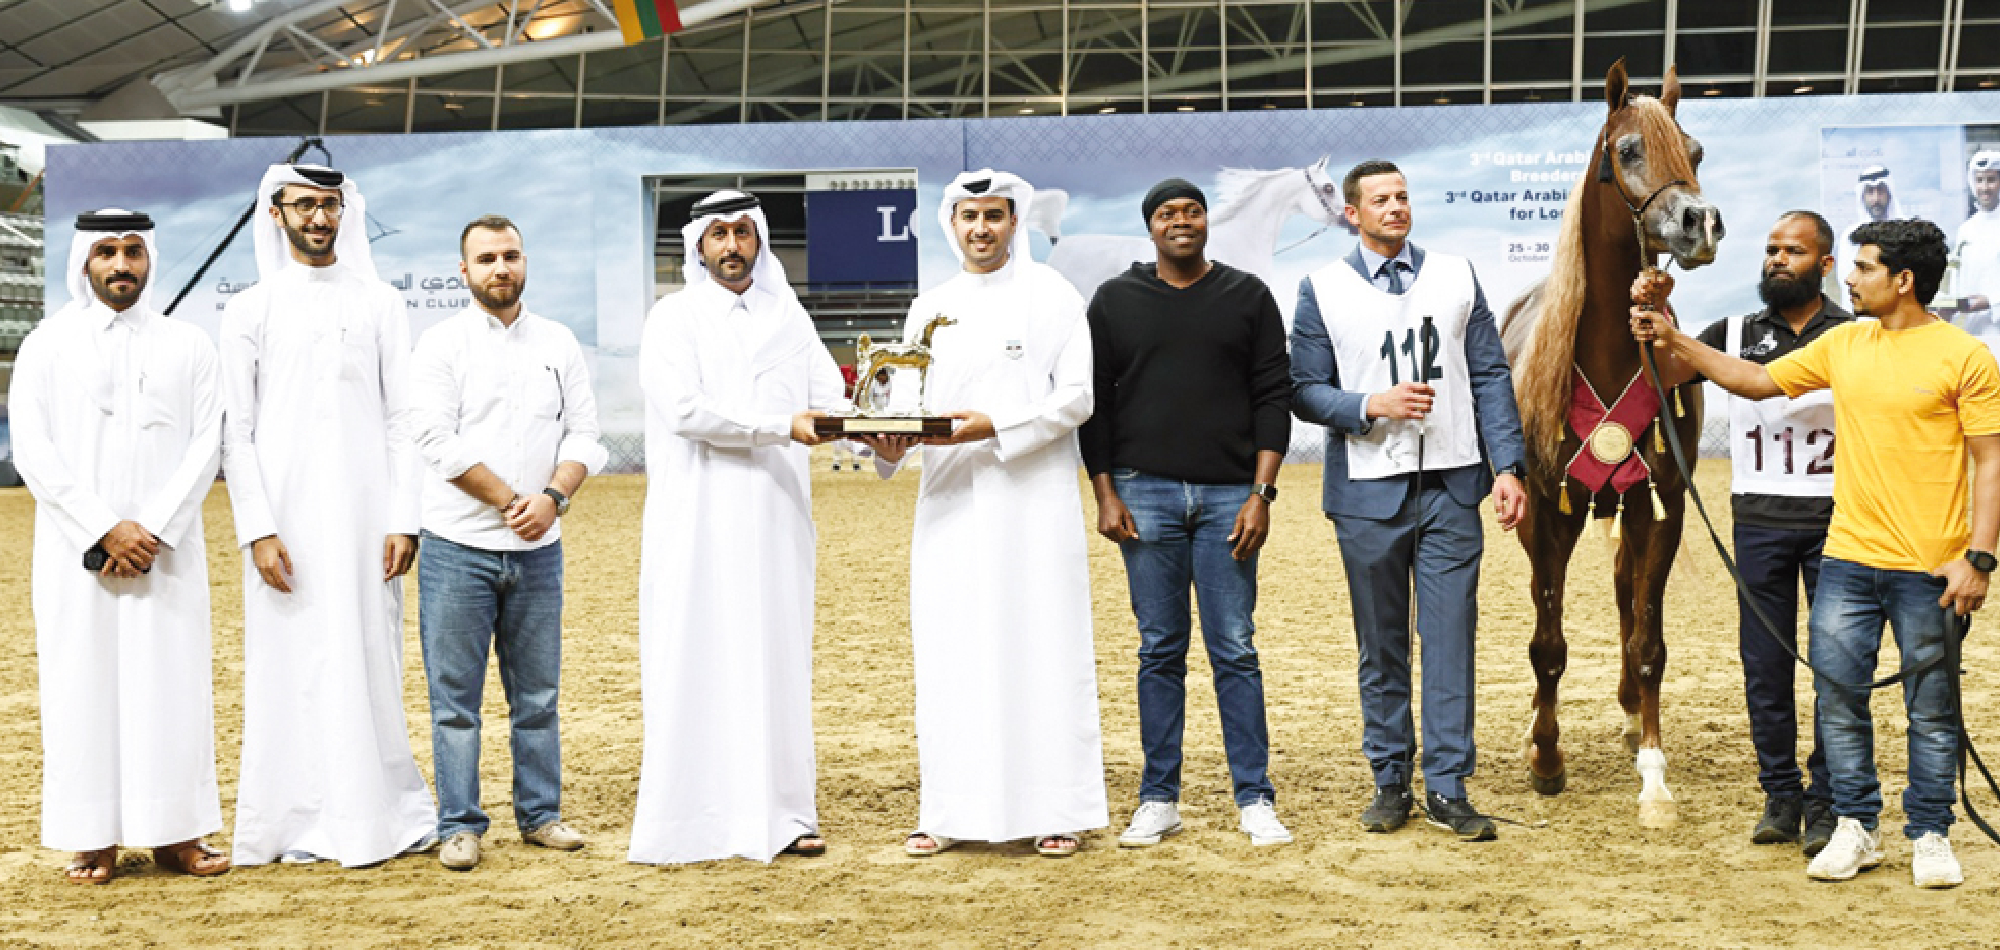  Qatar Arabian Horse Show for Local Bred wraps-up